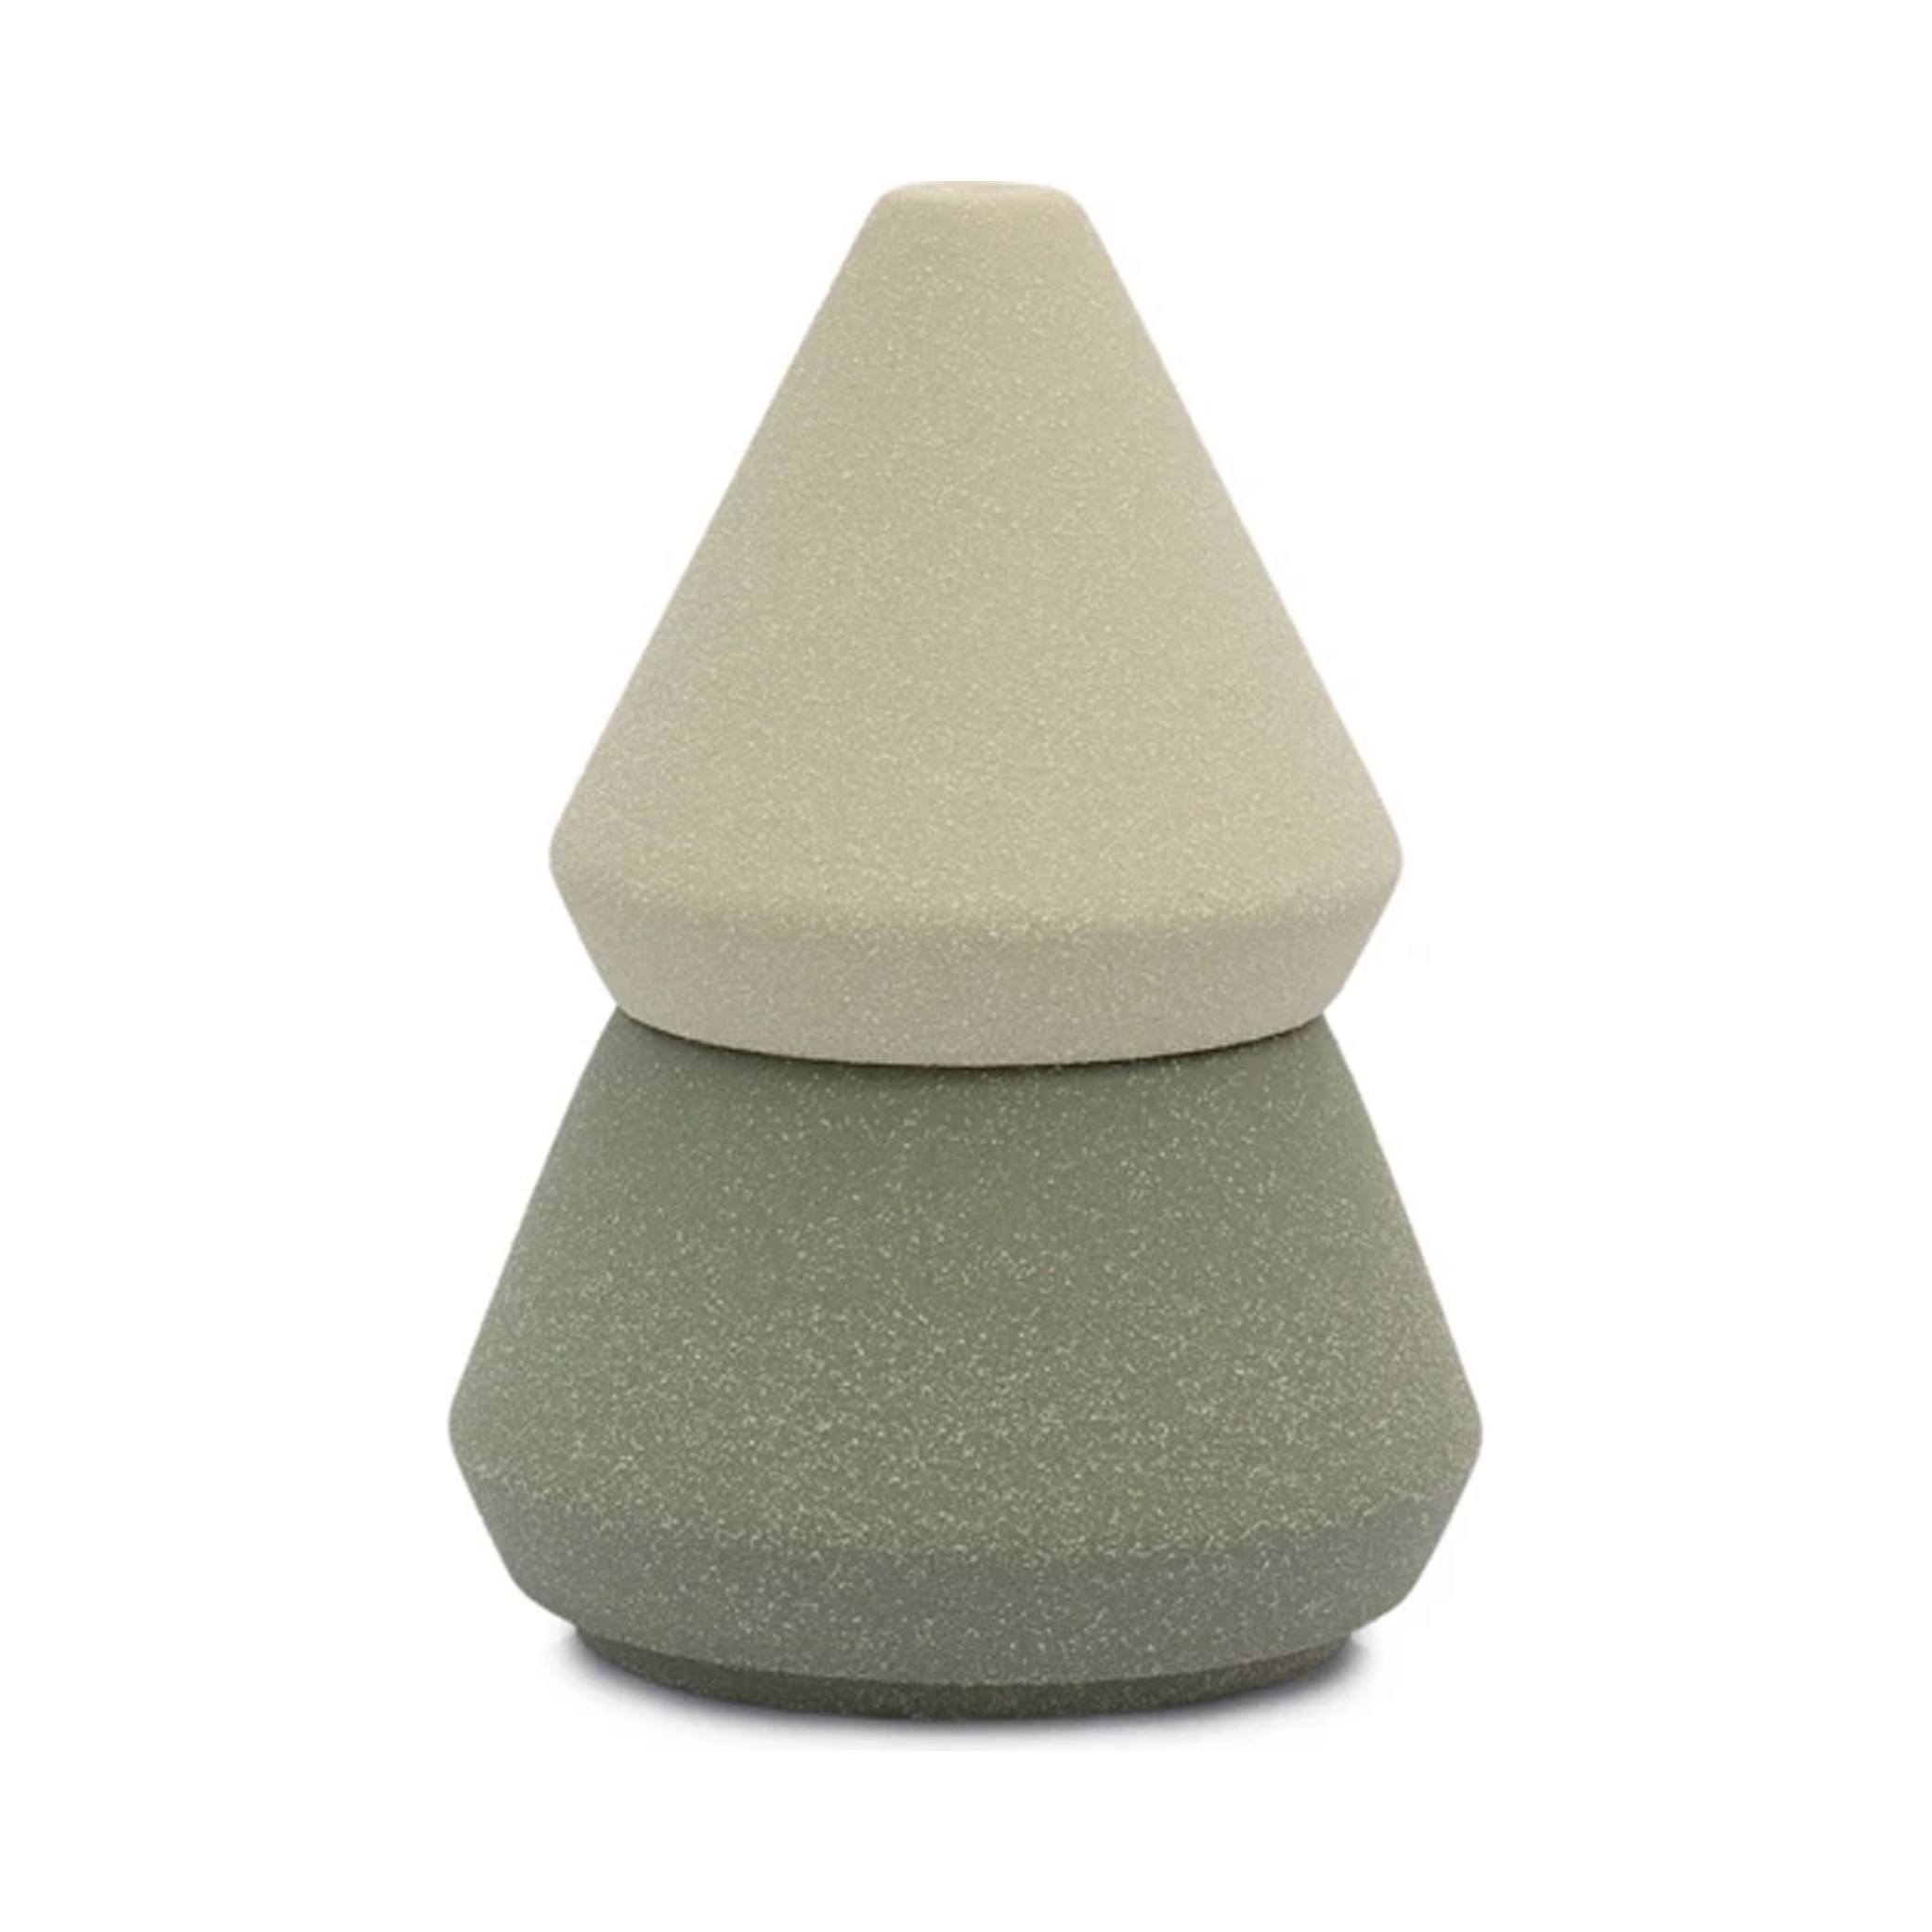 paddywax-cypress-and-fir-tree-stack-ceramic-candle